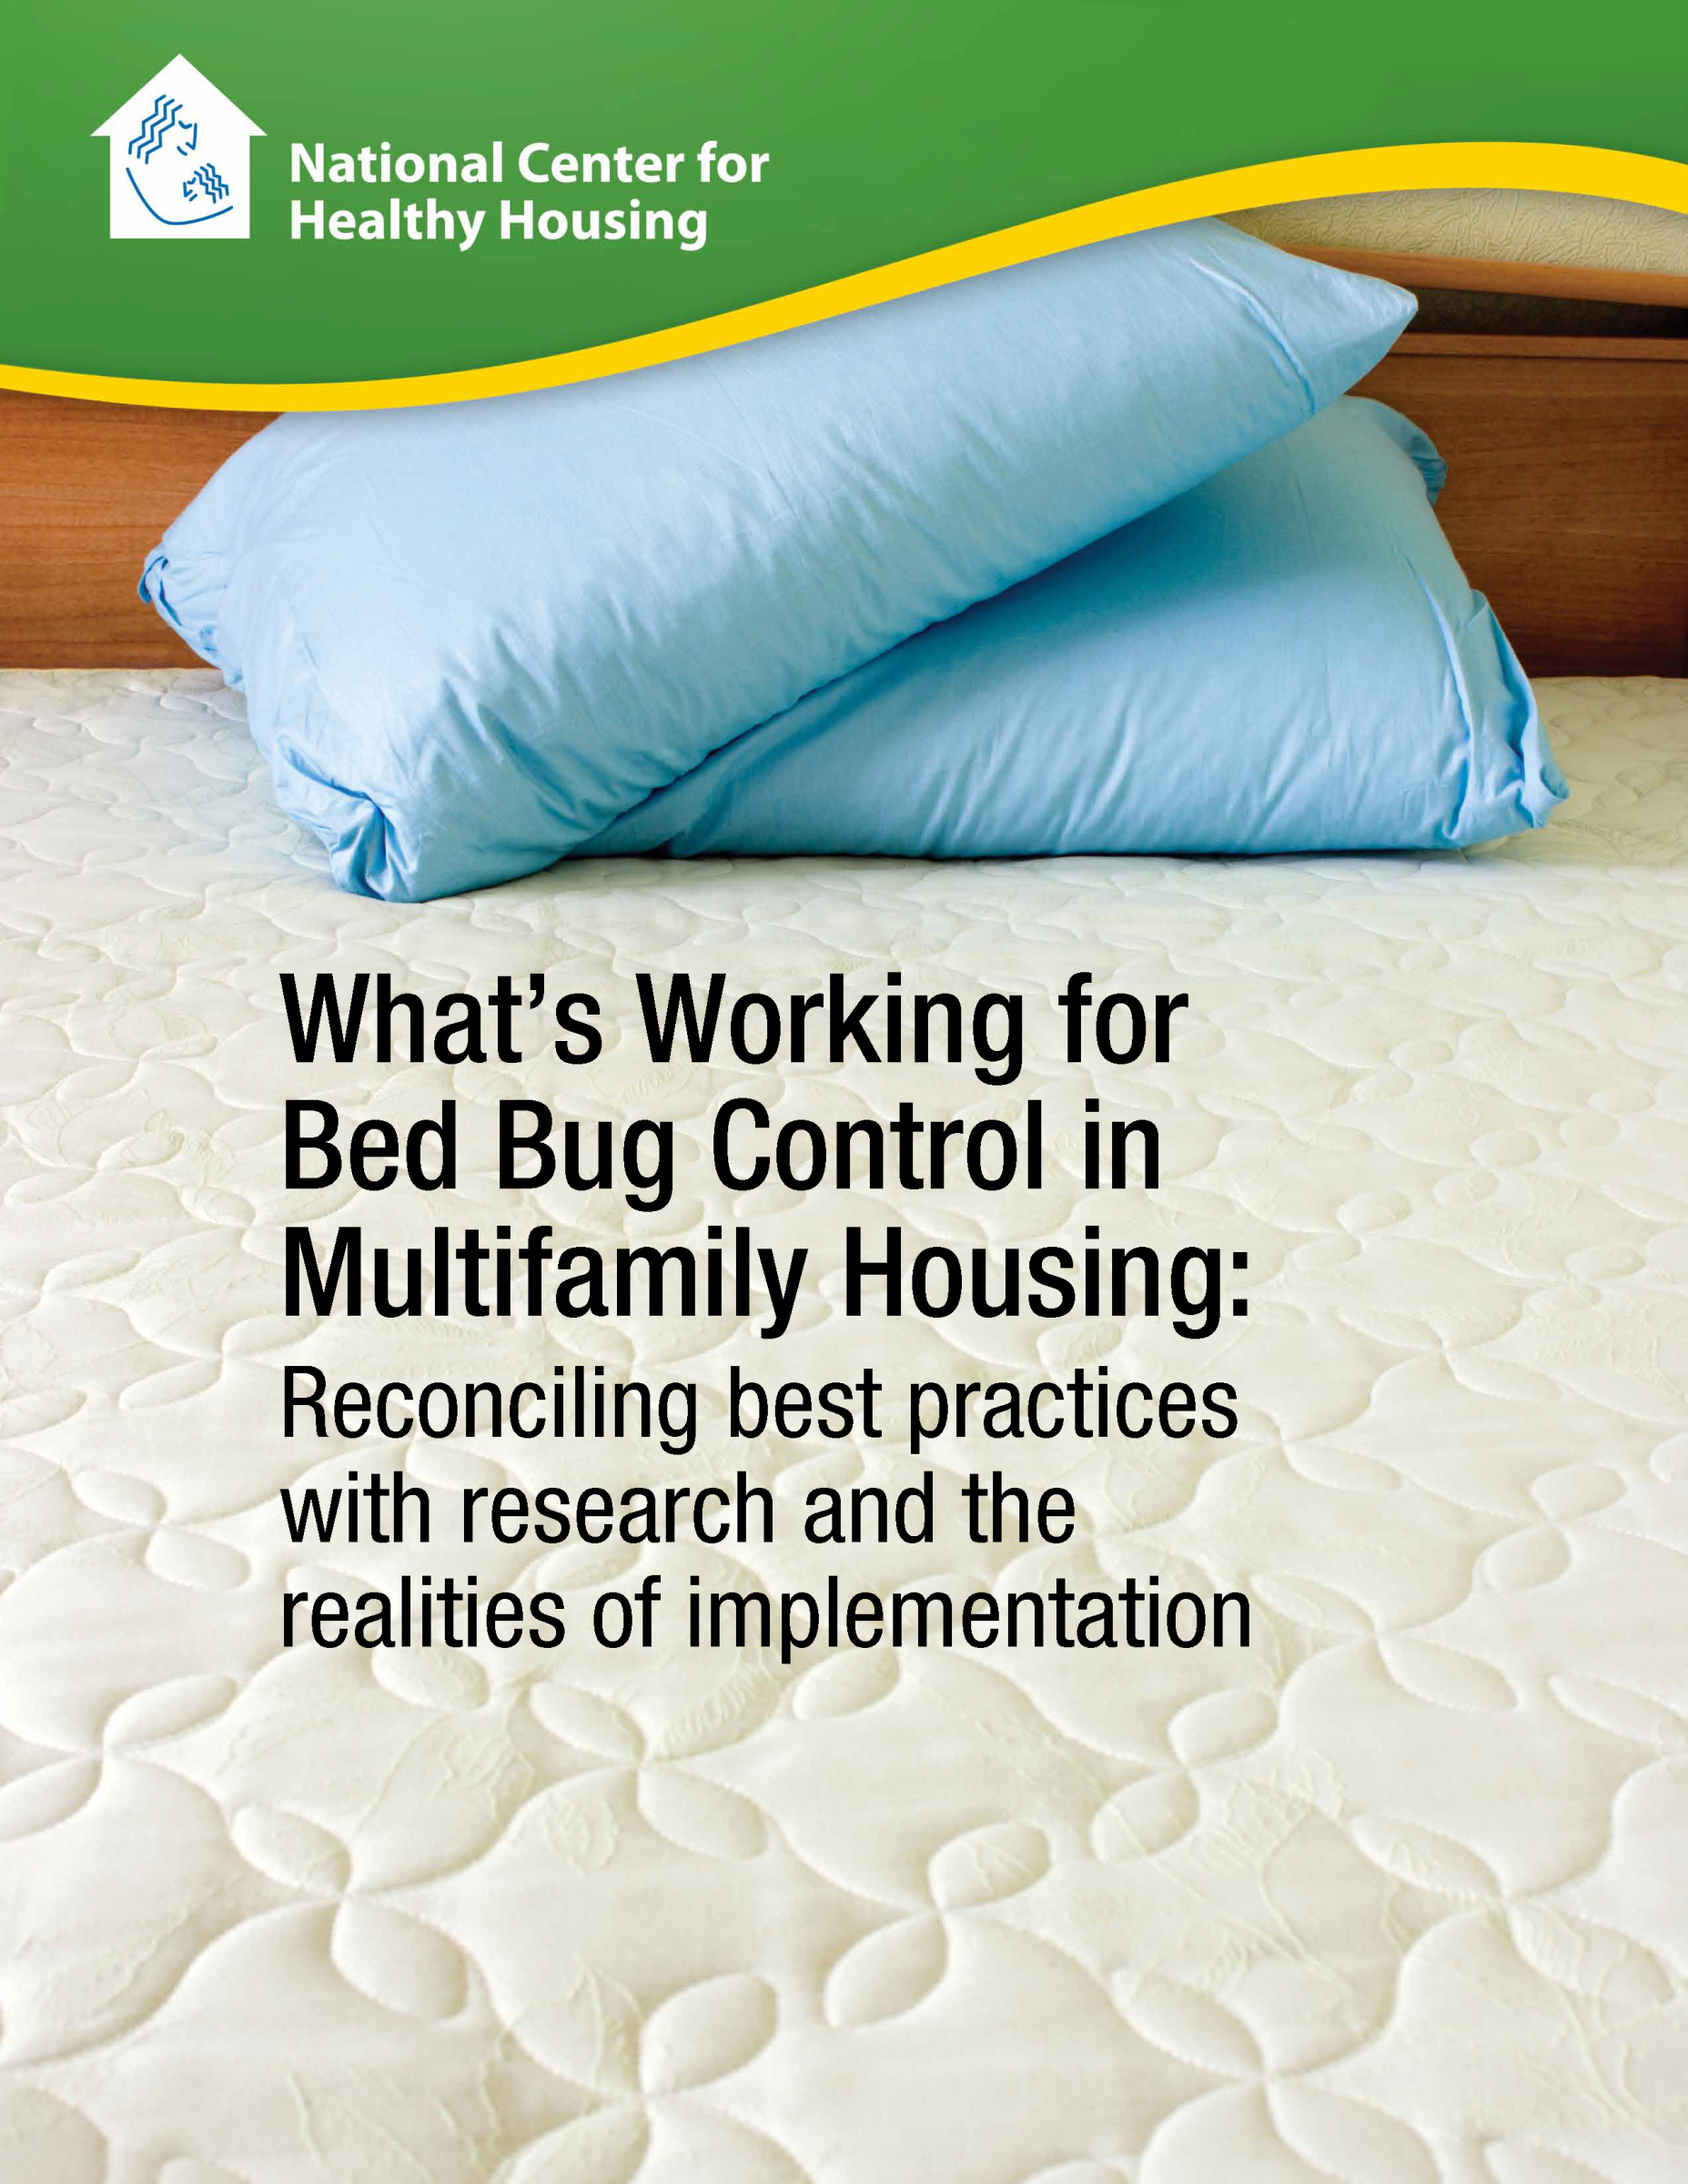 What's Working for Bed Bug Control in Multifamily Housing